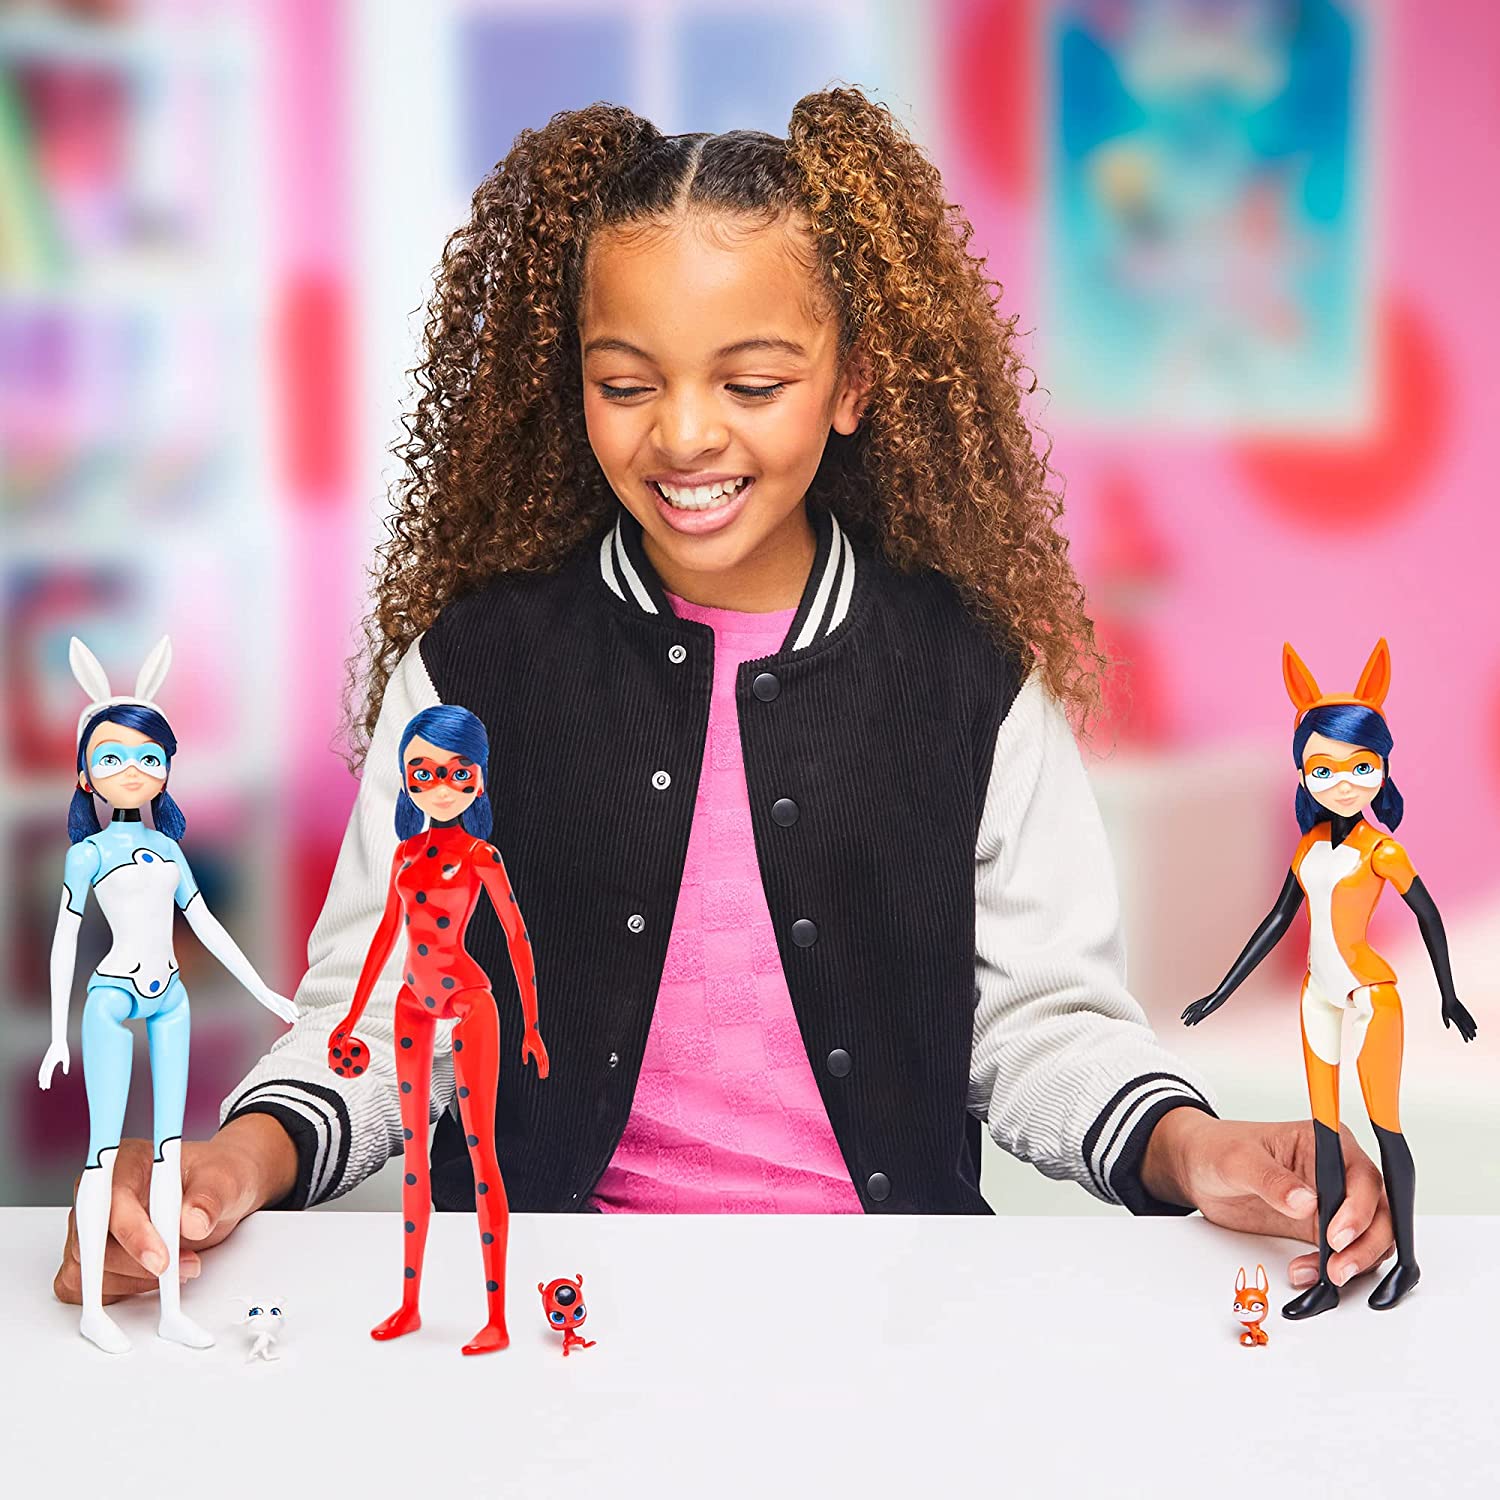 Toy Station on Instagram: Each Magic Heroez Transformation doll has a  special super-suit design!🔥🦸‍♀️ Unbox the new Miraculous Magic Heroez Transformation  Surprise. #water #wateractivatedtoys #magicheroes #miraculous #hiddenheroes  #hero #reveal